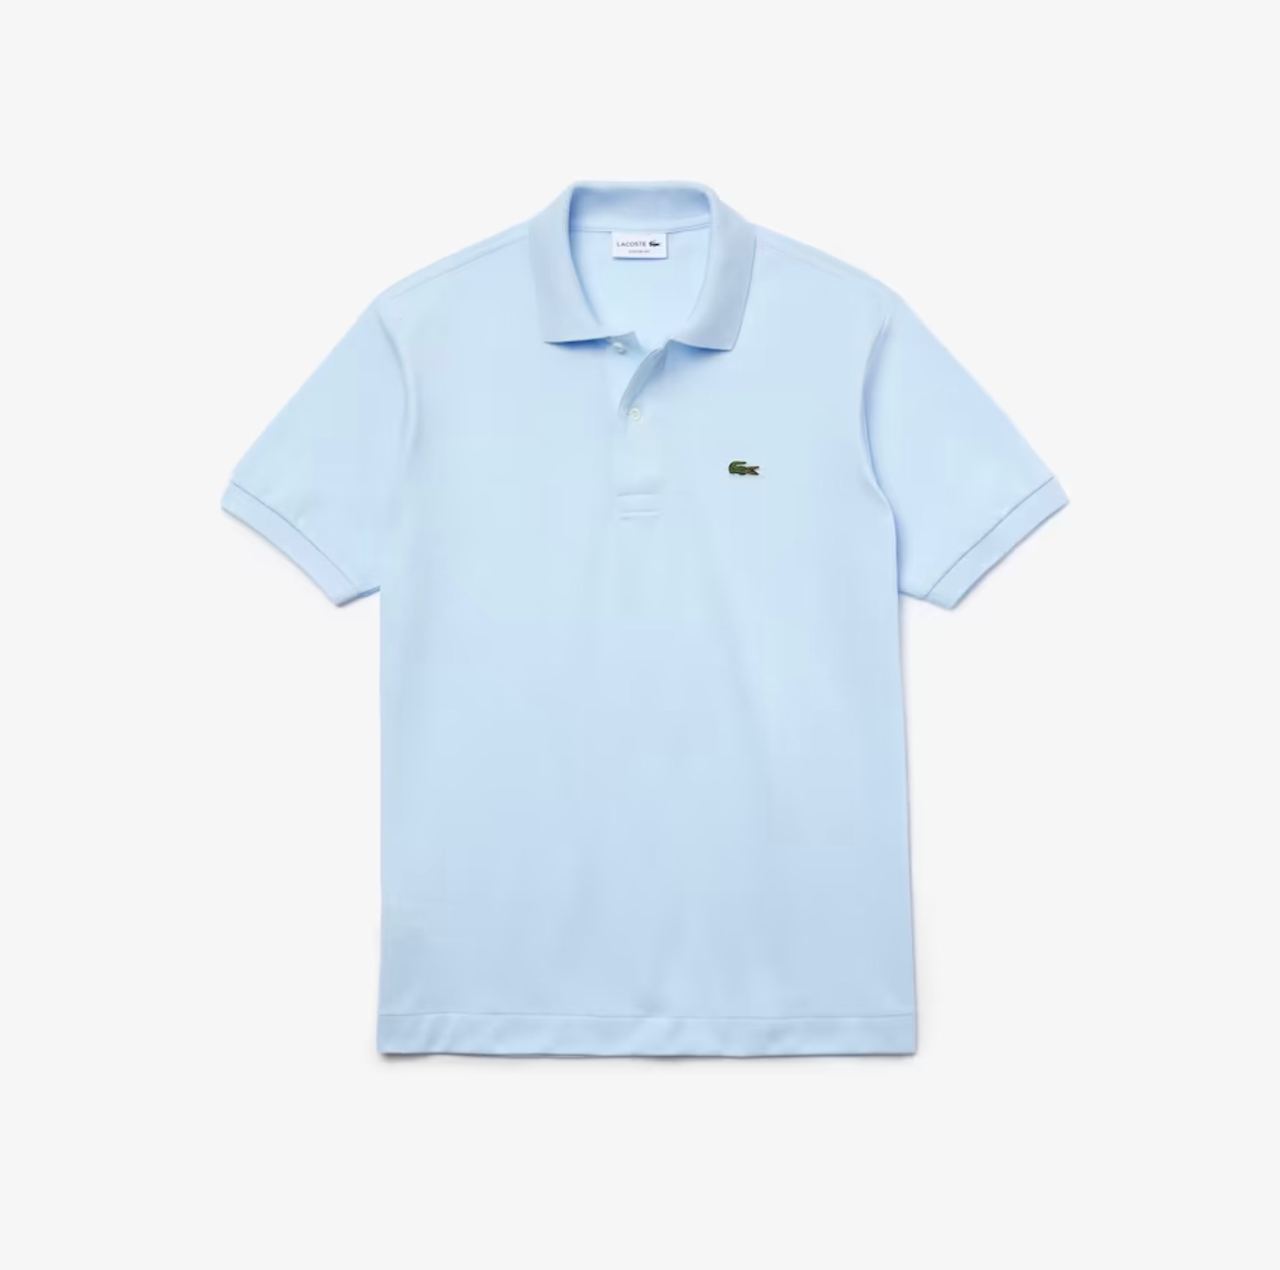 Up to 50% OFF Lacoste - Men's Classic Fit Polo Many Colors & Sizes Available $57.99